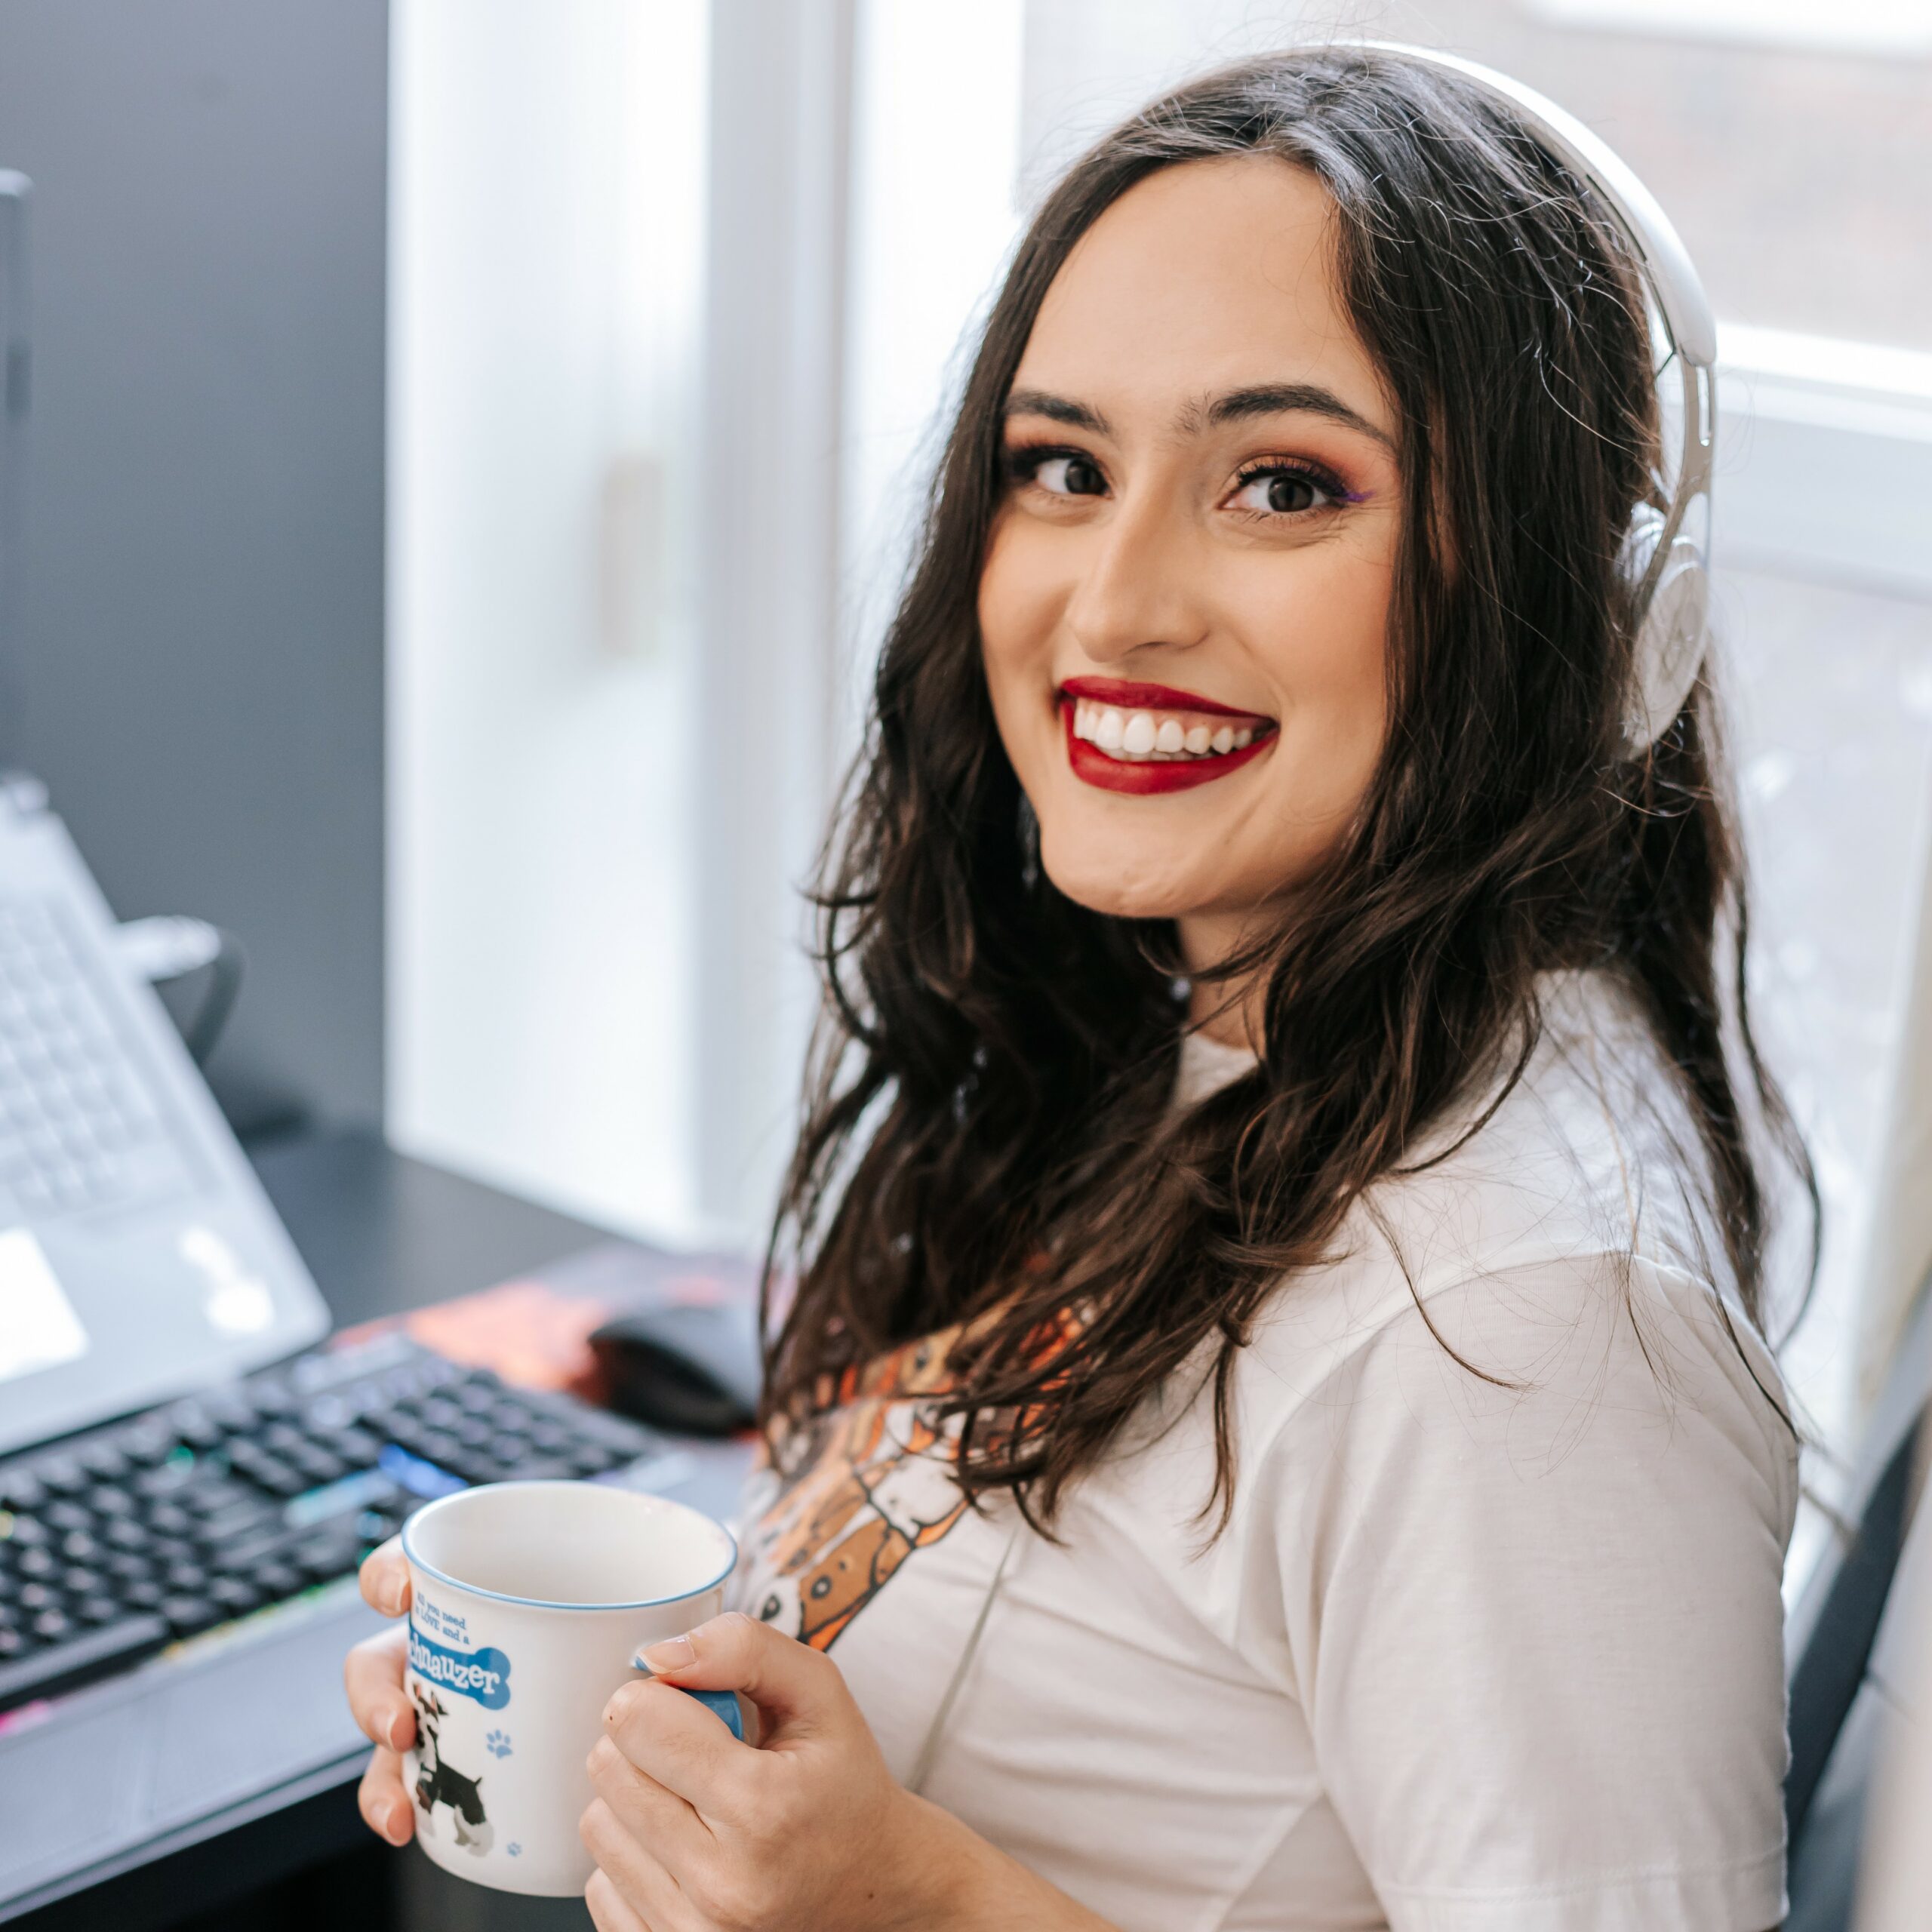 Amanda Duarte, a woman with light skin and dark brown hair smiles with her mouth open at the camera. She is wearing a white t-shirt with dog drawings on the front and holding a white and blue mug with both hands. The background has a white window on her right and a black desk with a laptop and keyboard on her right, and she has white headphones on her head.